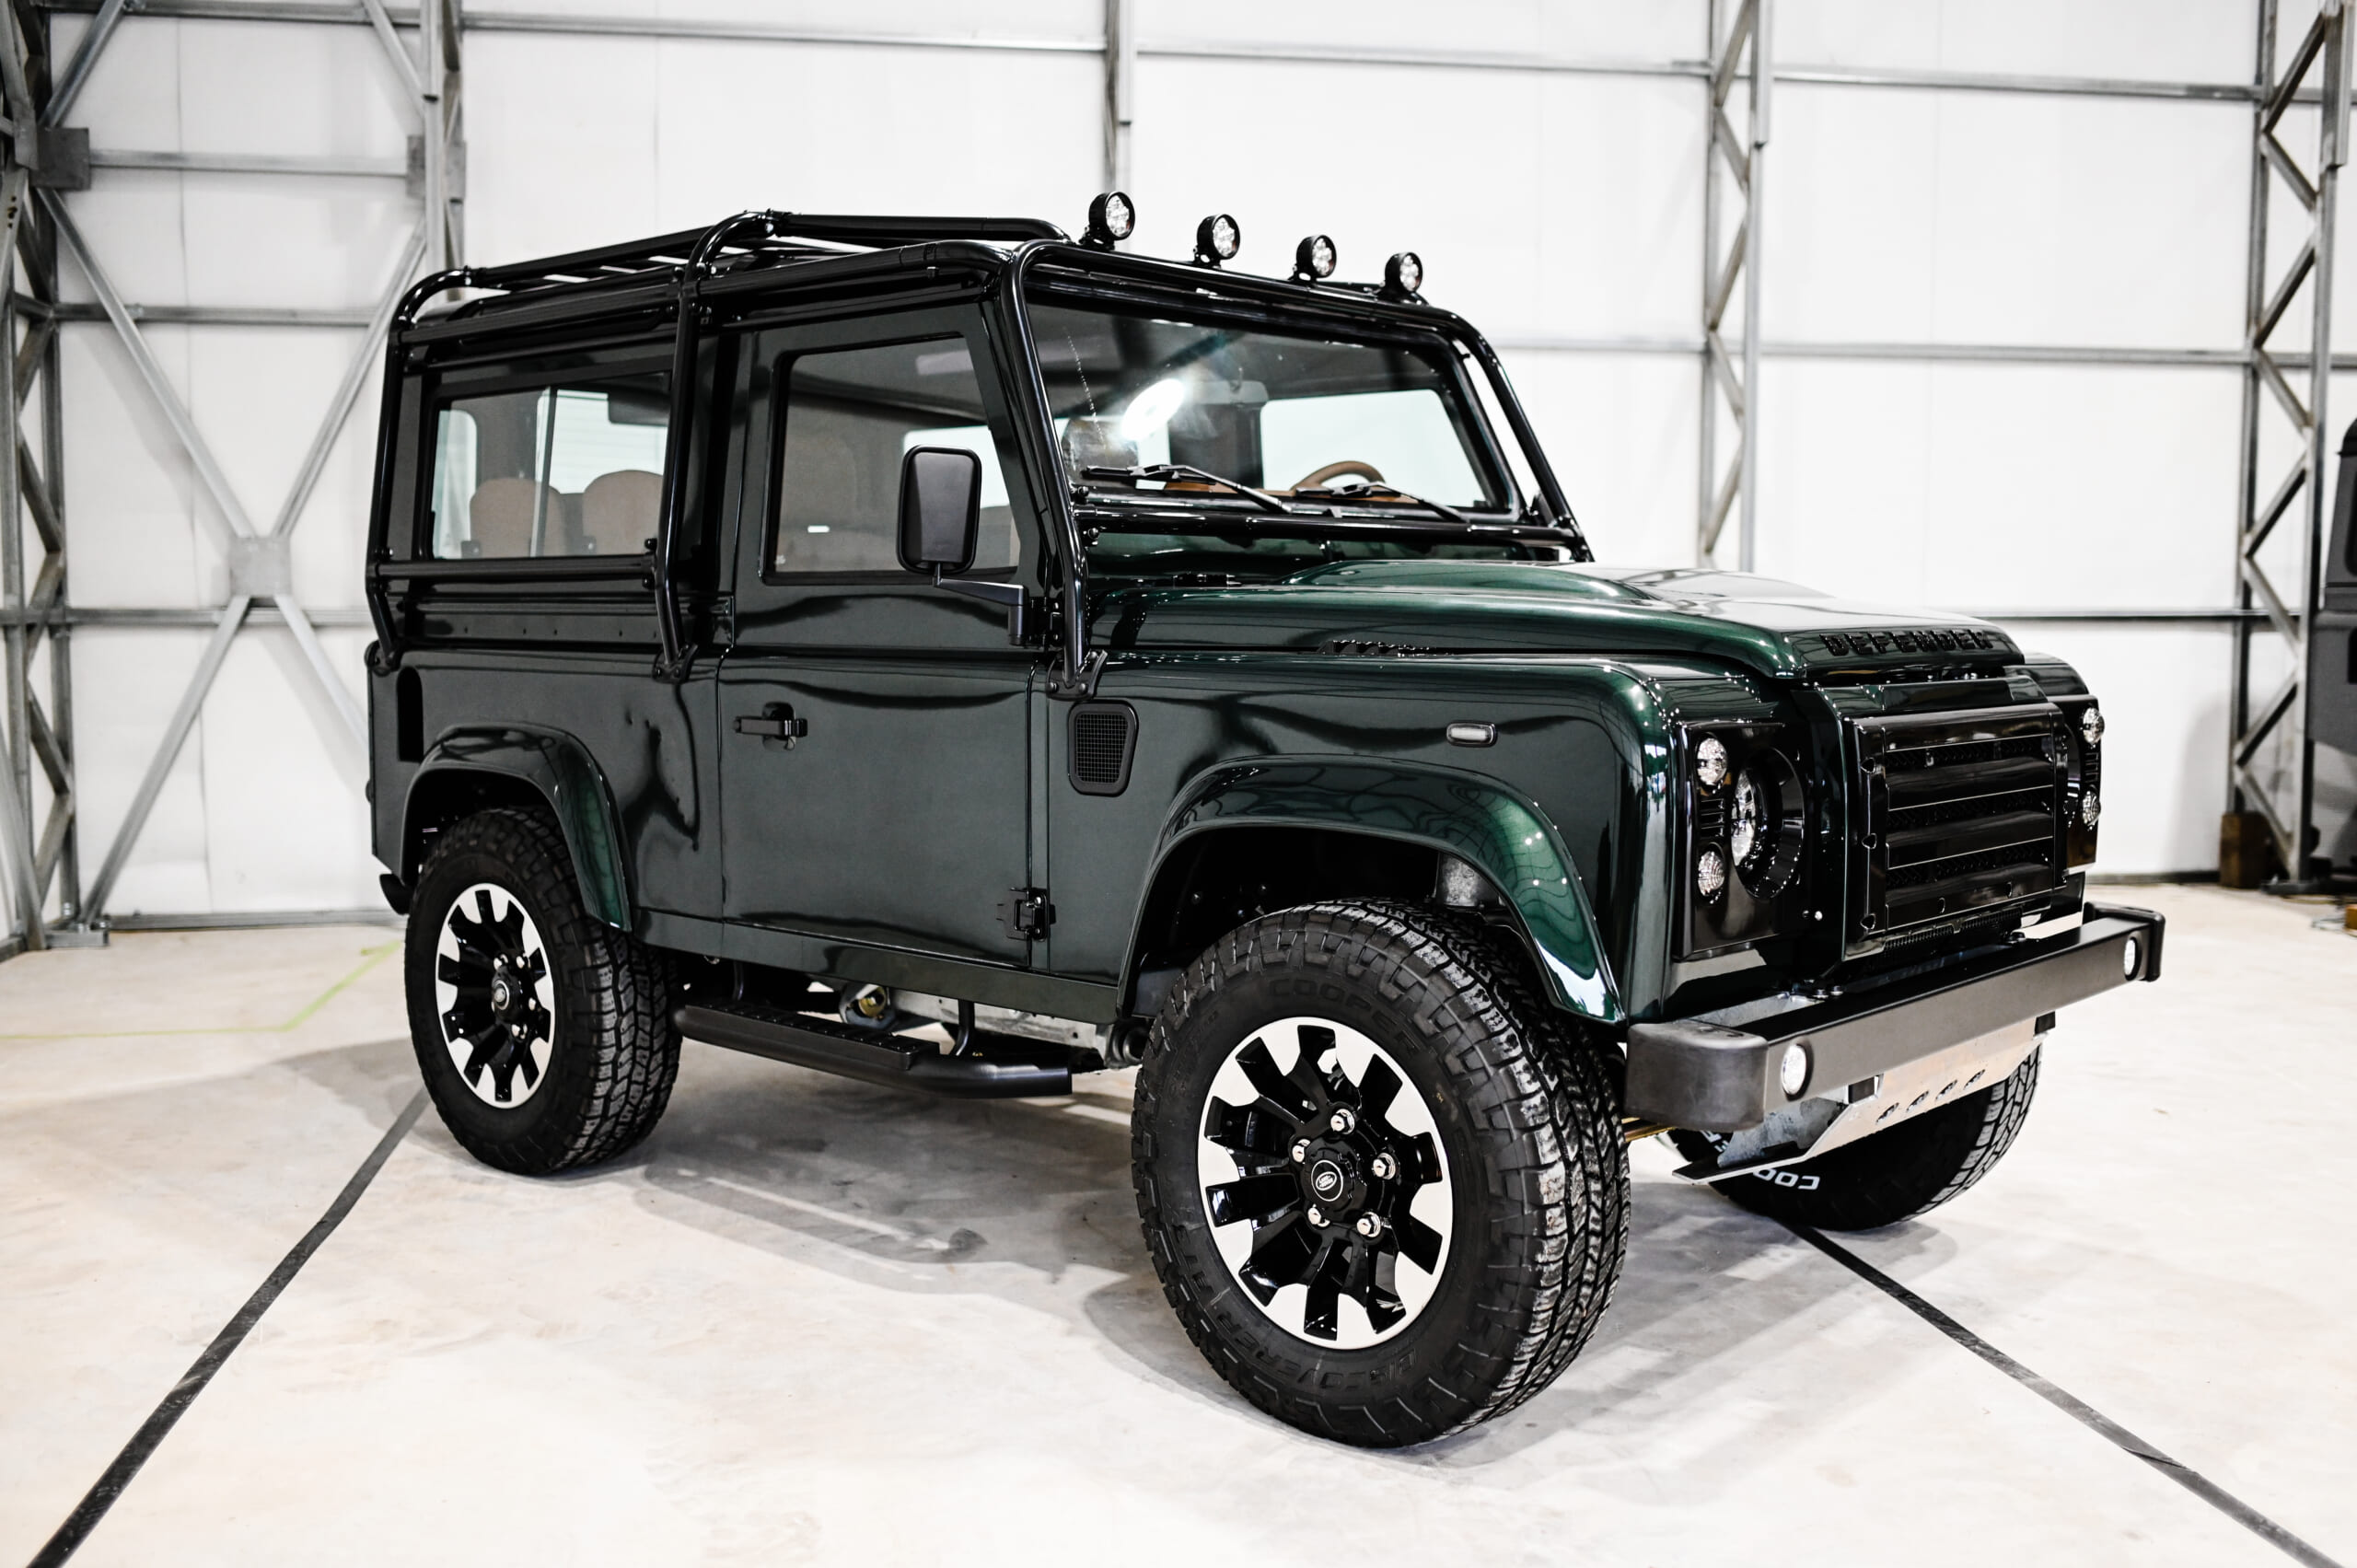 Meet The Builder Of The World's Greatest Restomod Land Rover Defenders -  Maxim